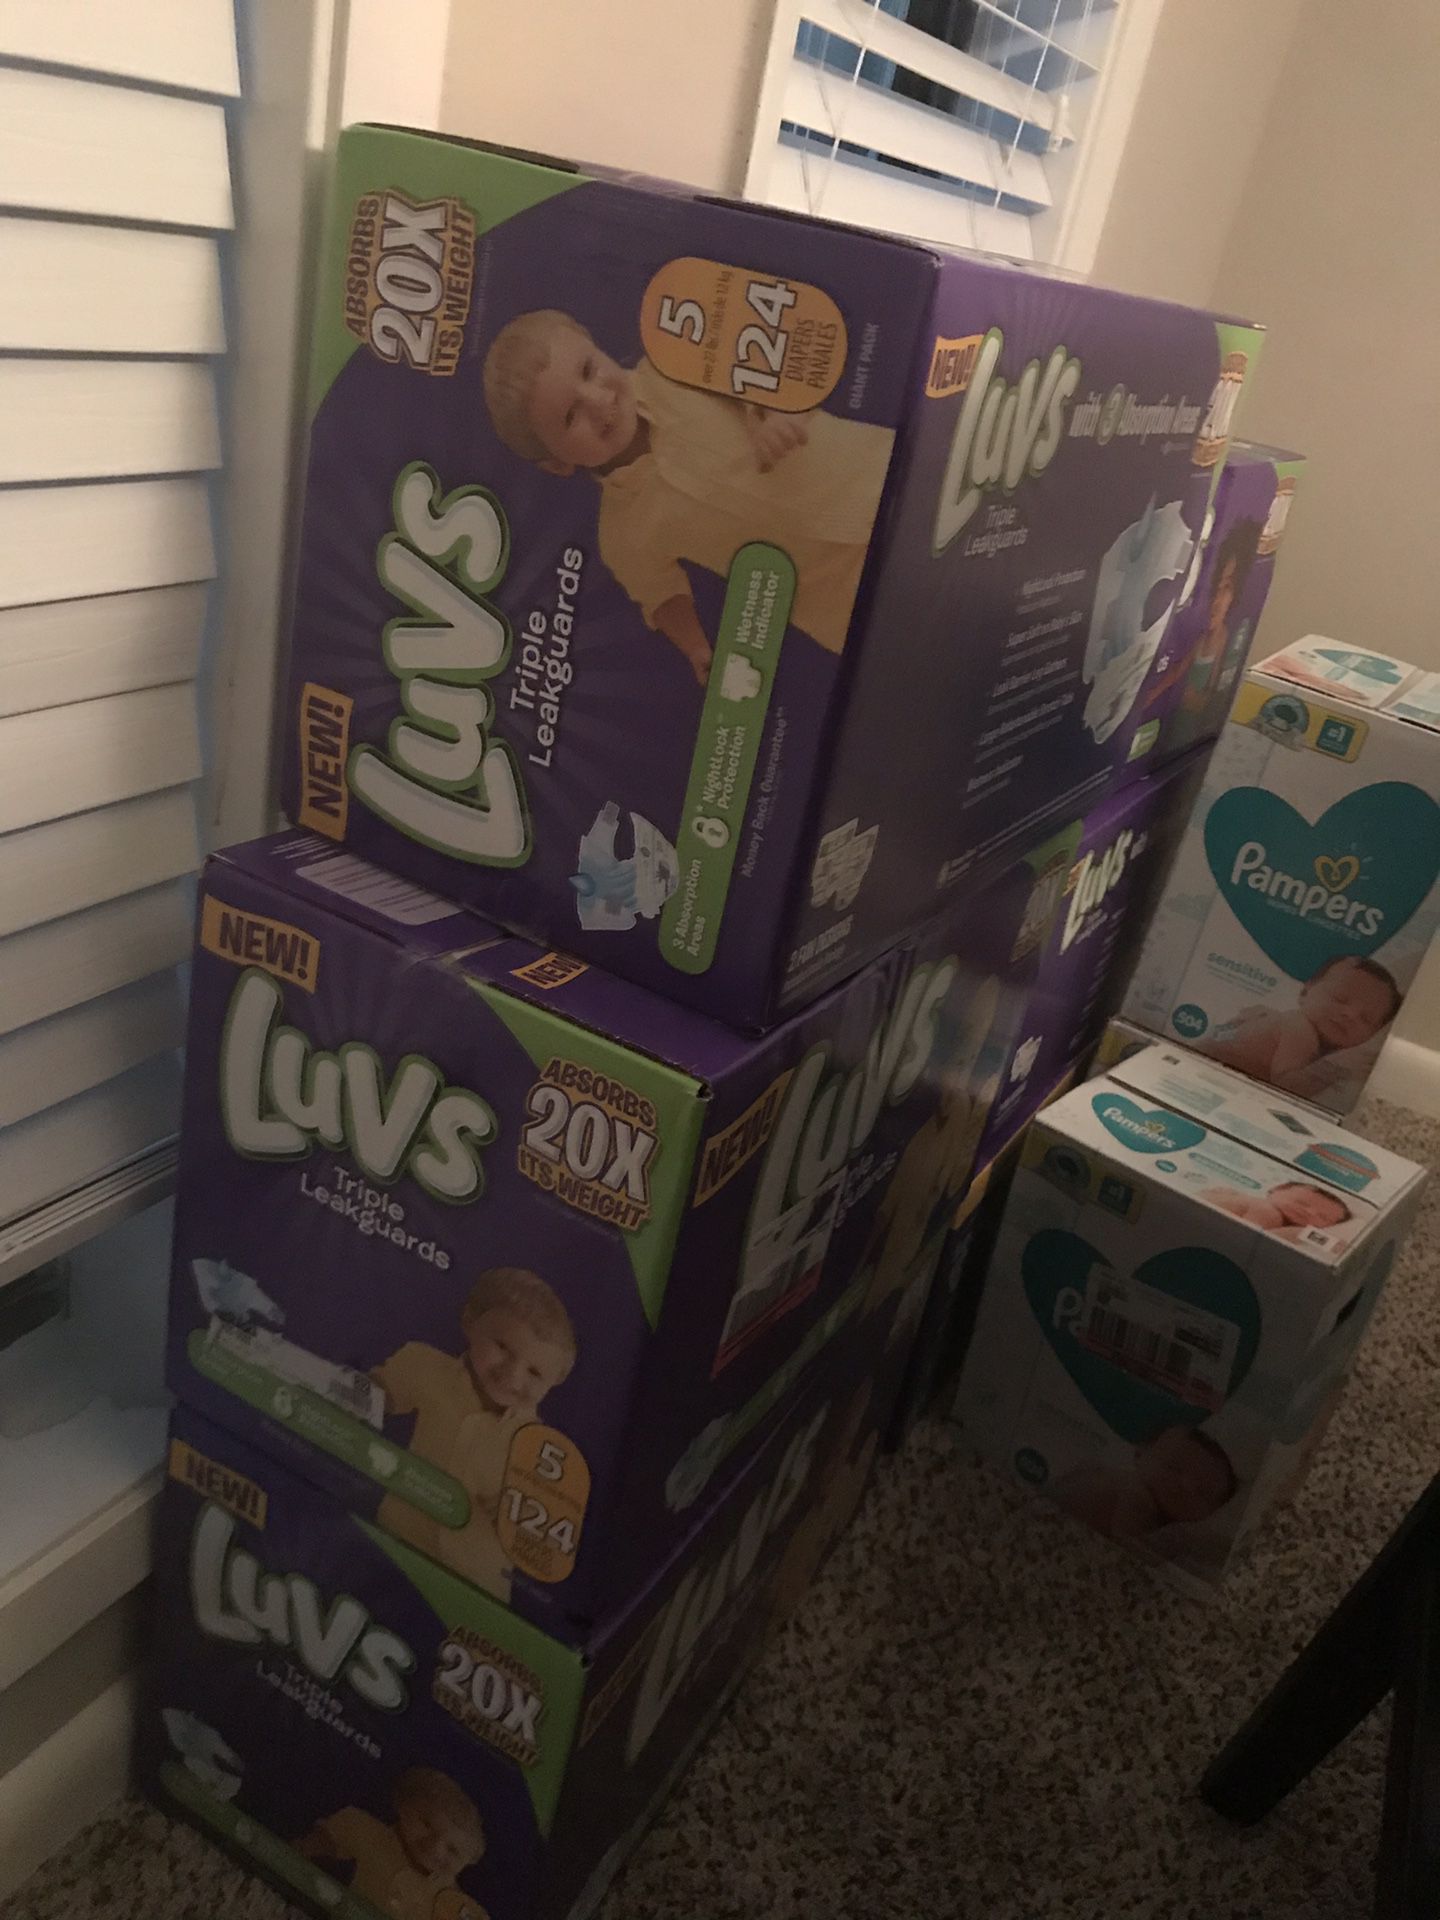 DIAPERS